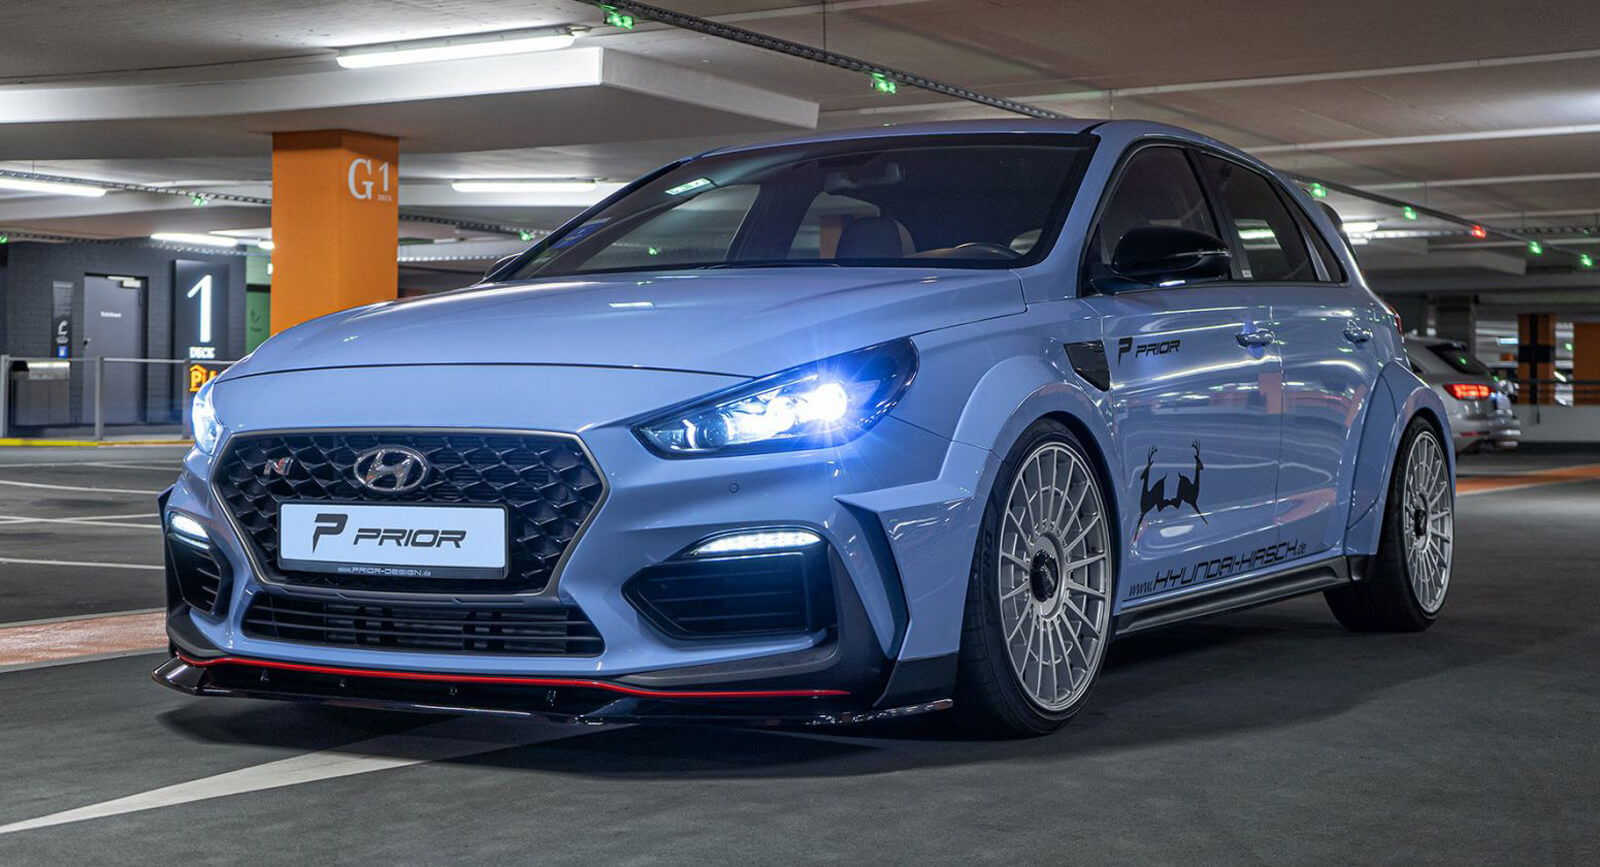 Hyundai I30 N Looks Wrc Ready Thanks To Prior Design S Widebody Kit Carscoops